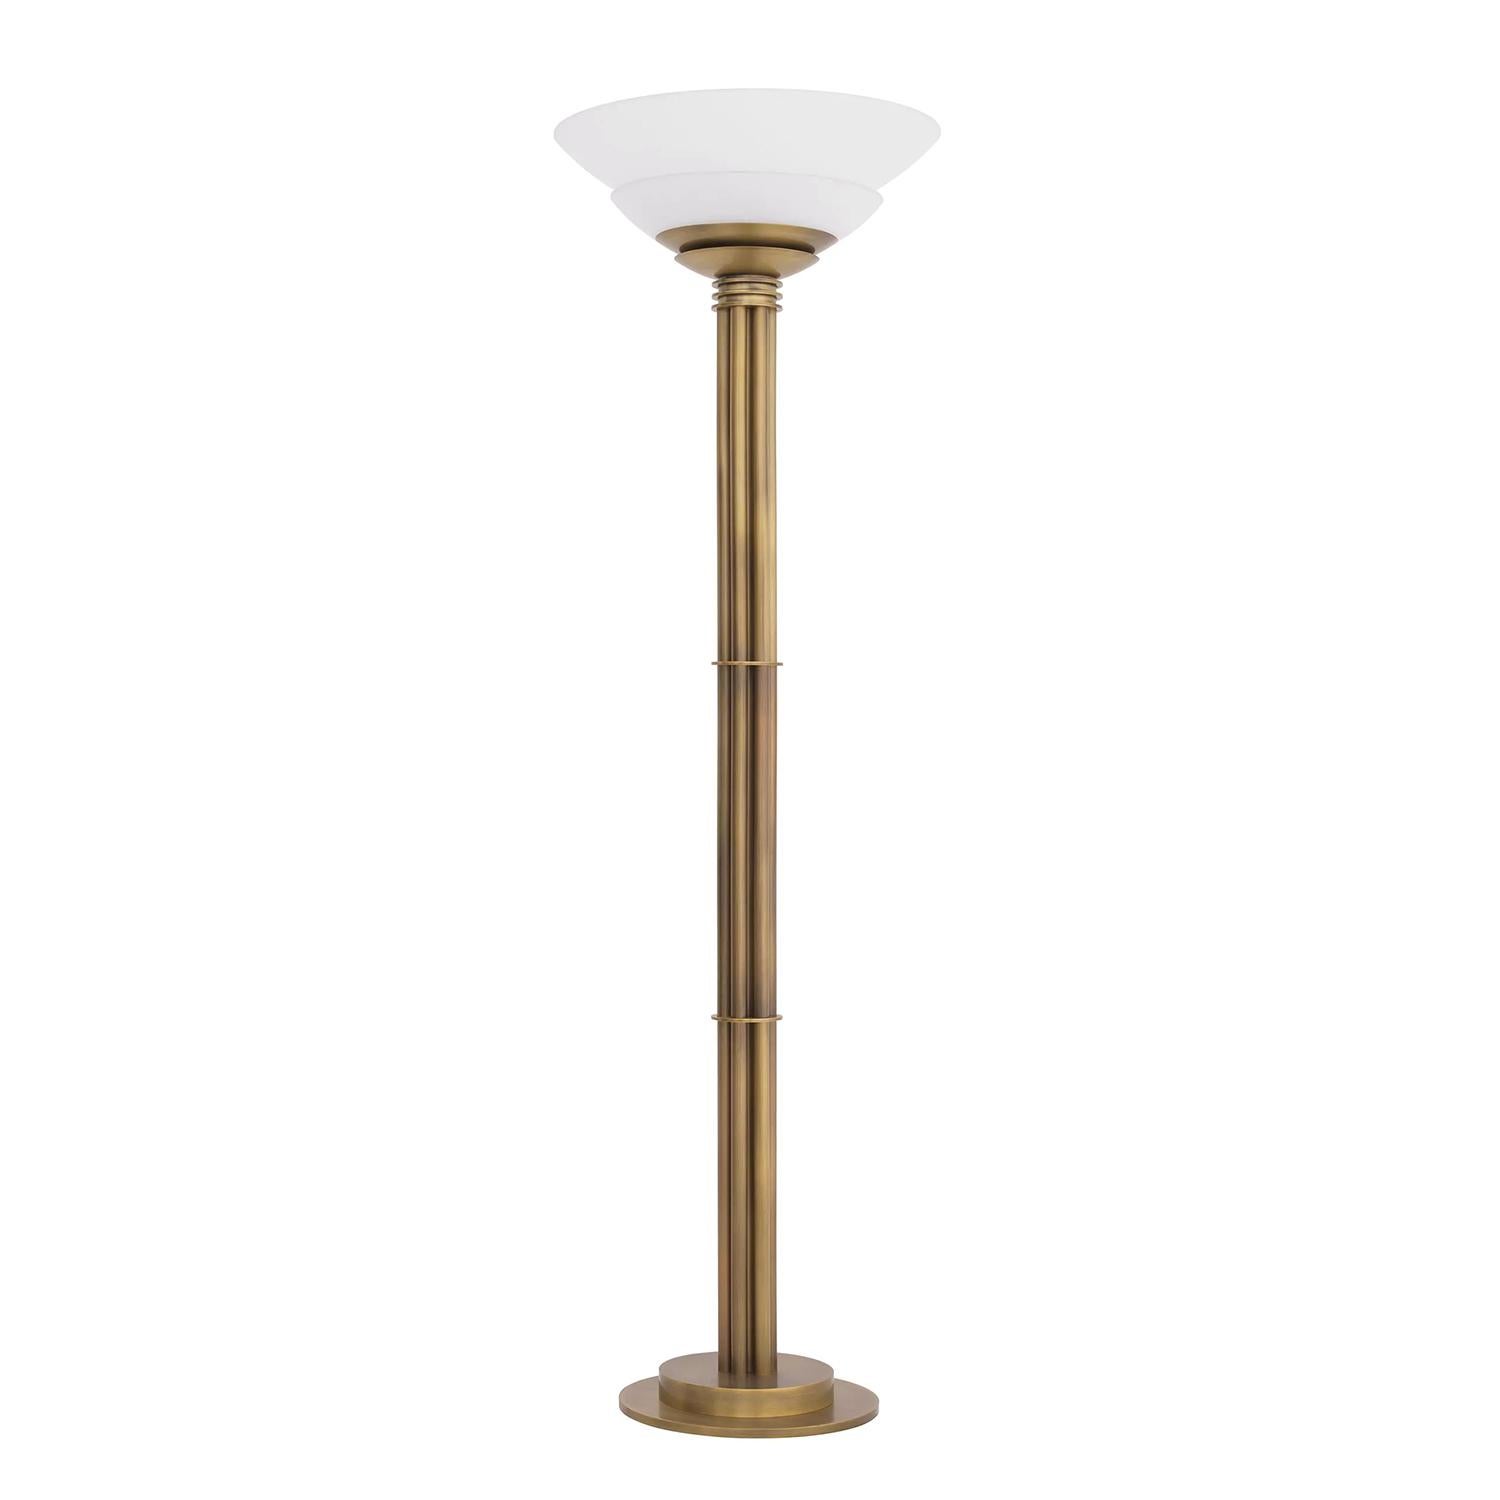 Floor lamp Chianto brass all in brass and iron in antique finish
with frosted glass shade. 1 Bulb, lamp holder type E27, 100 Watt,
200-220 volt. Bulb not included.